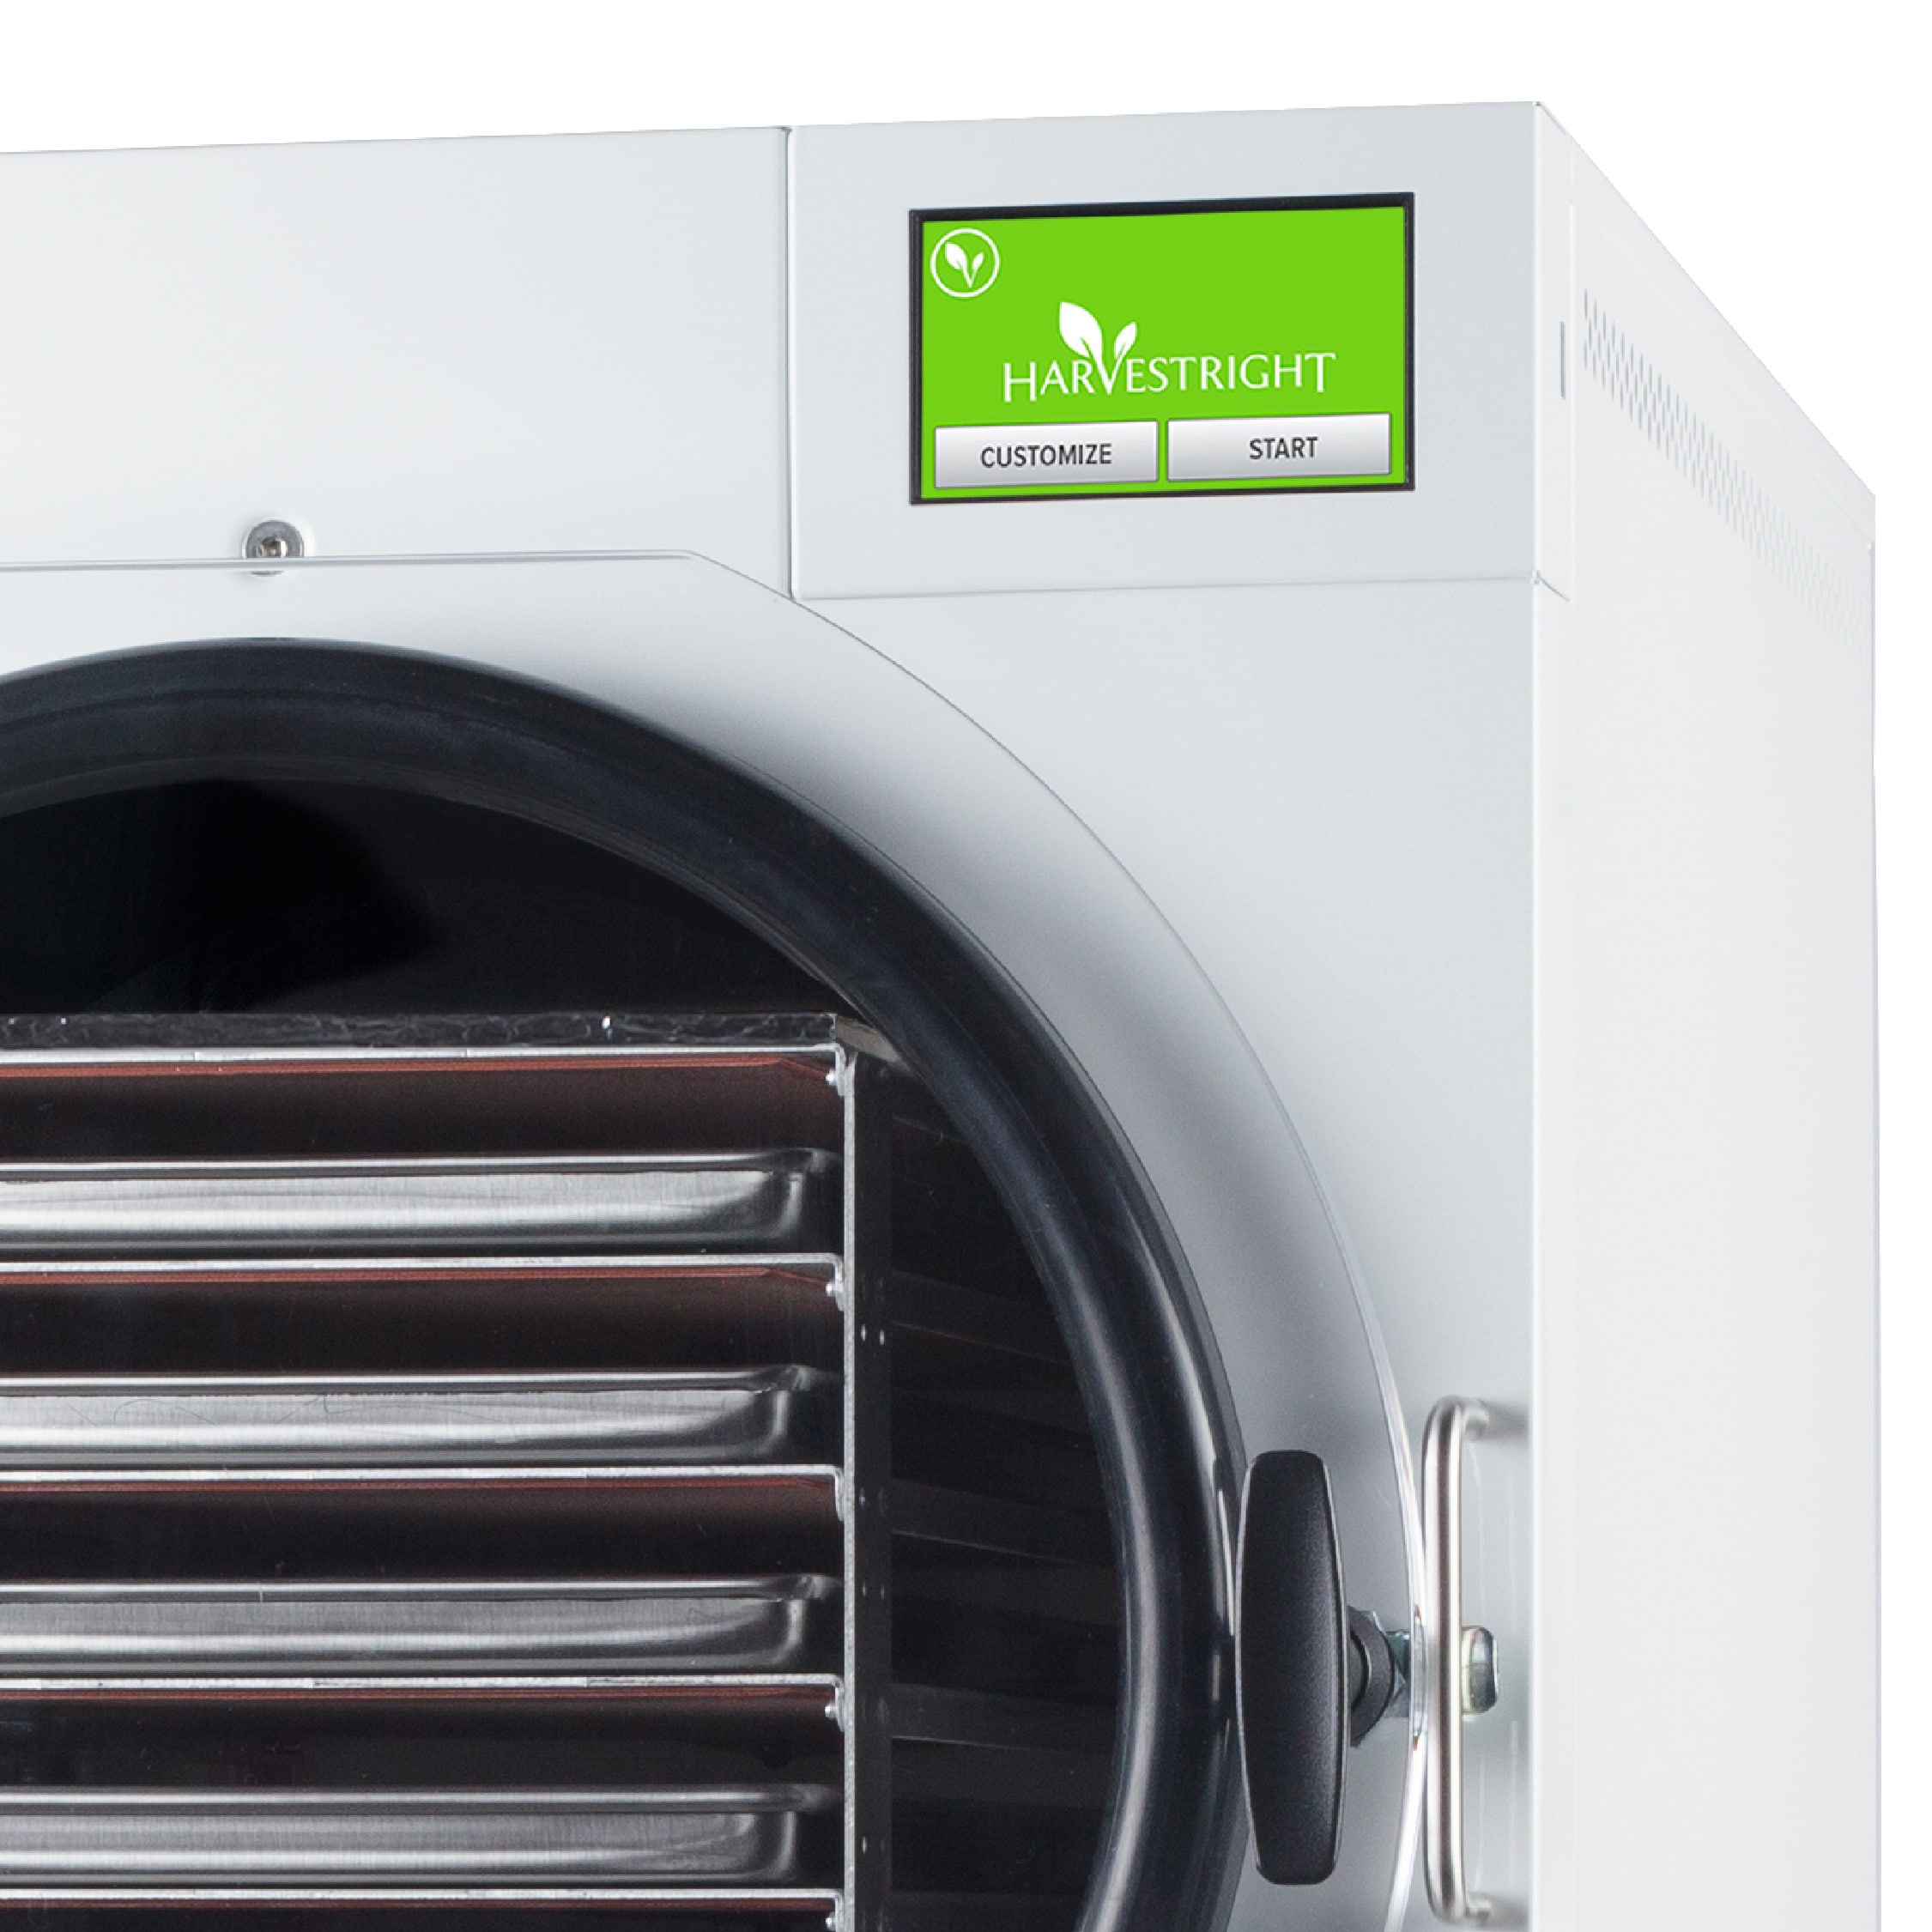 Harvest Right Freeze Dryers - Buy a home freeze dryer